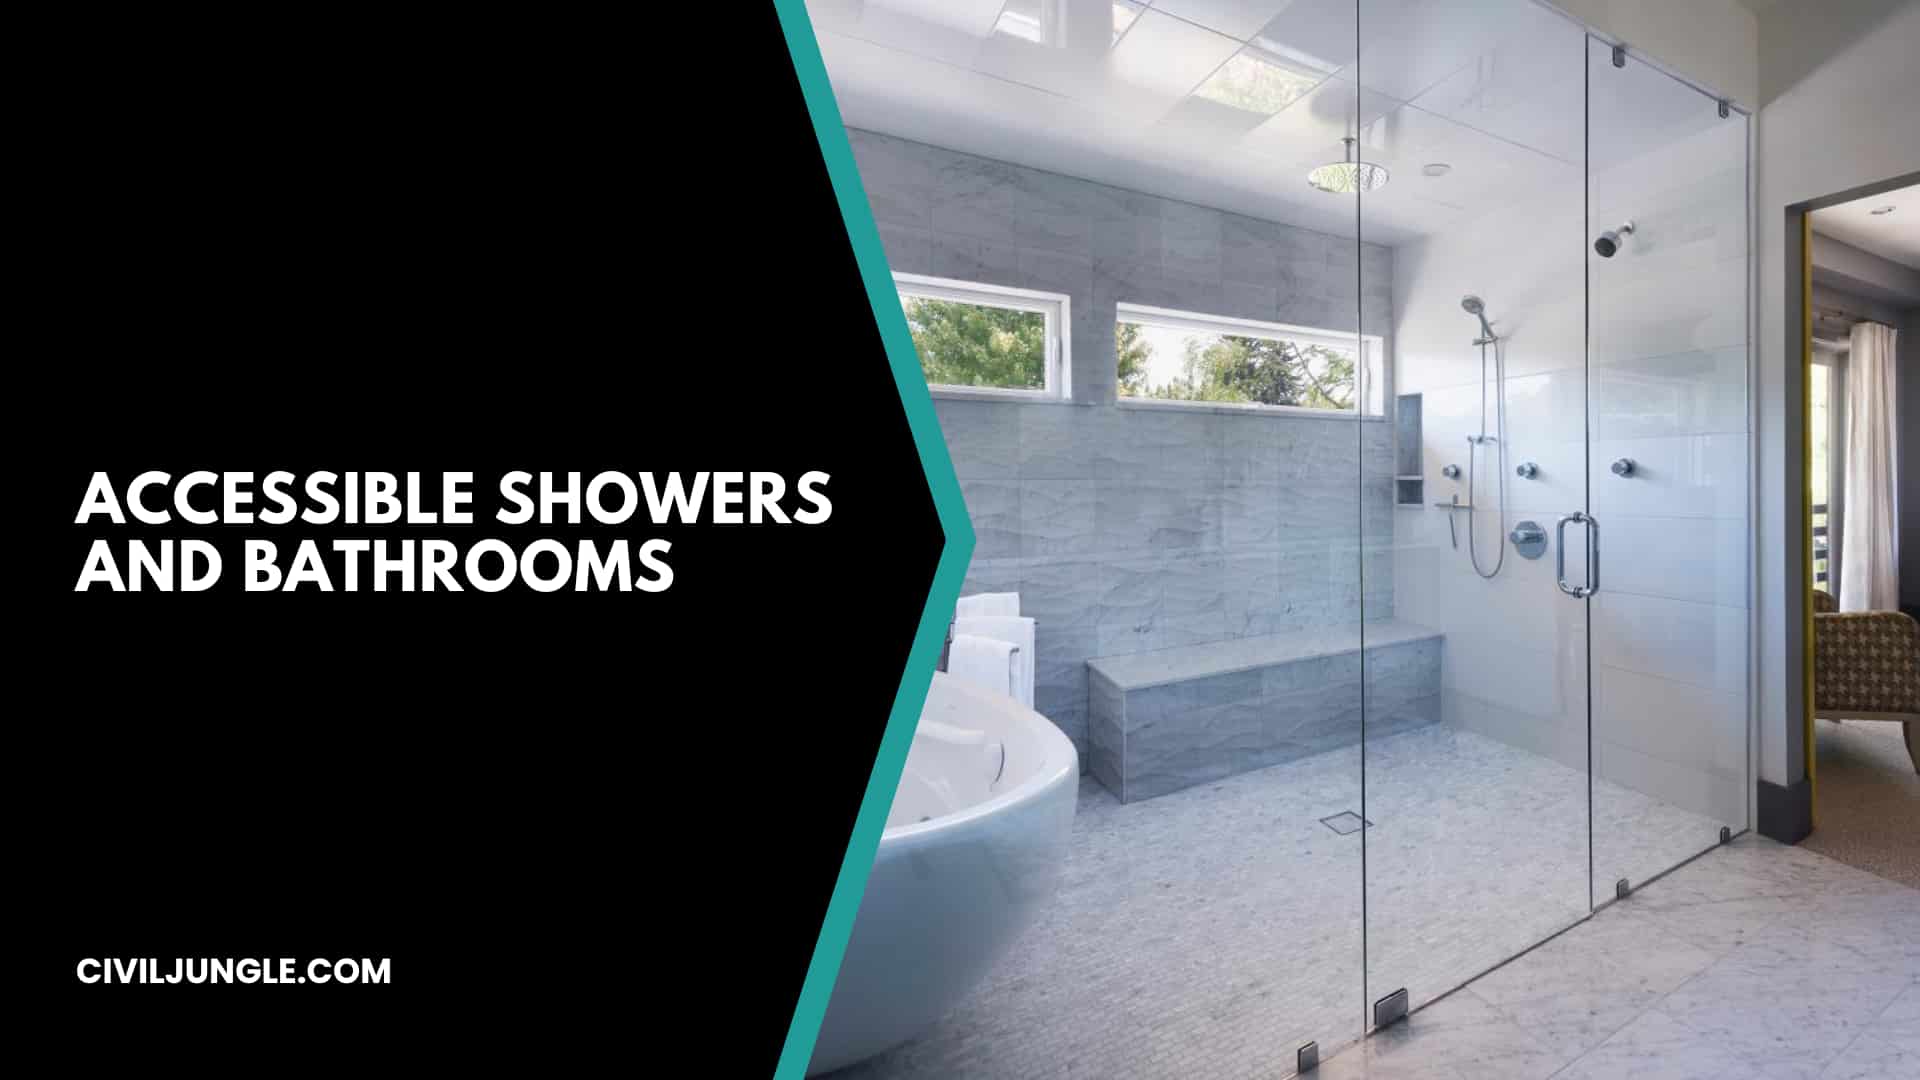 Accessible Showers and Bathrooms